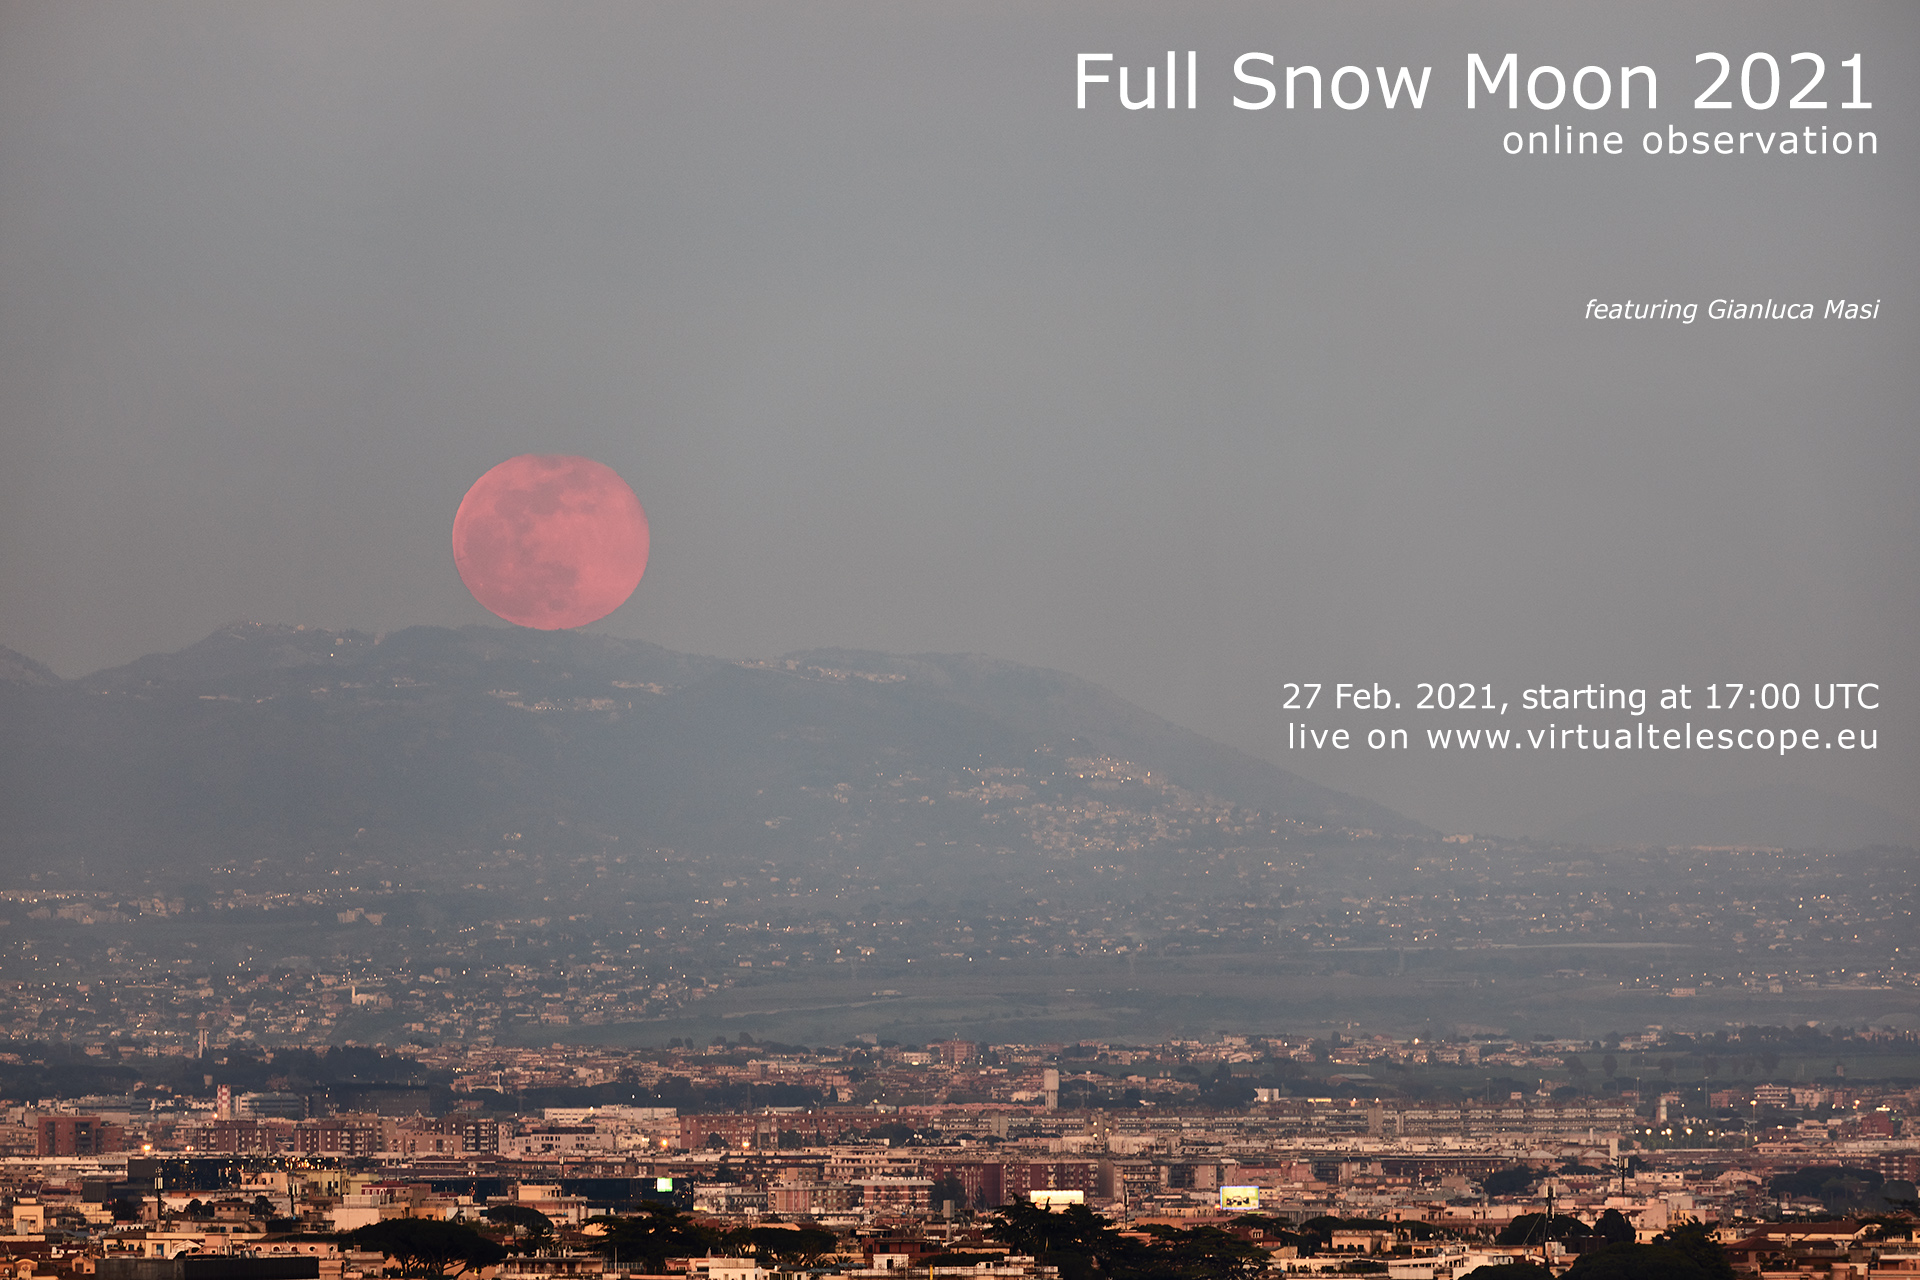 Full Snow Moon 2021: poster of the event